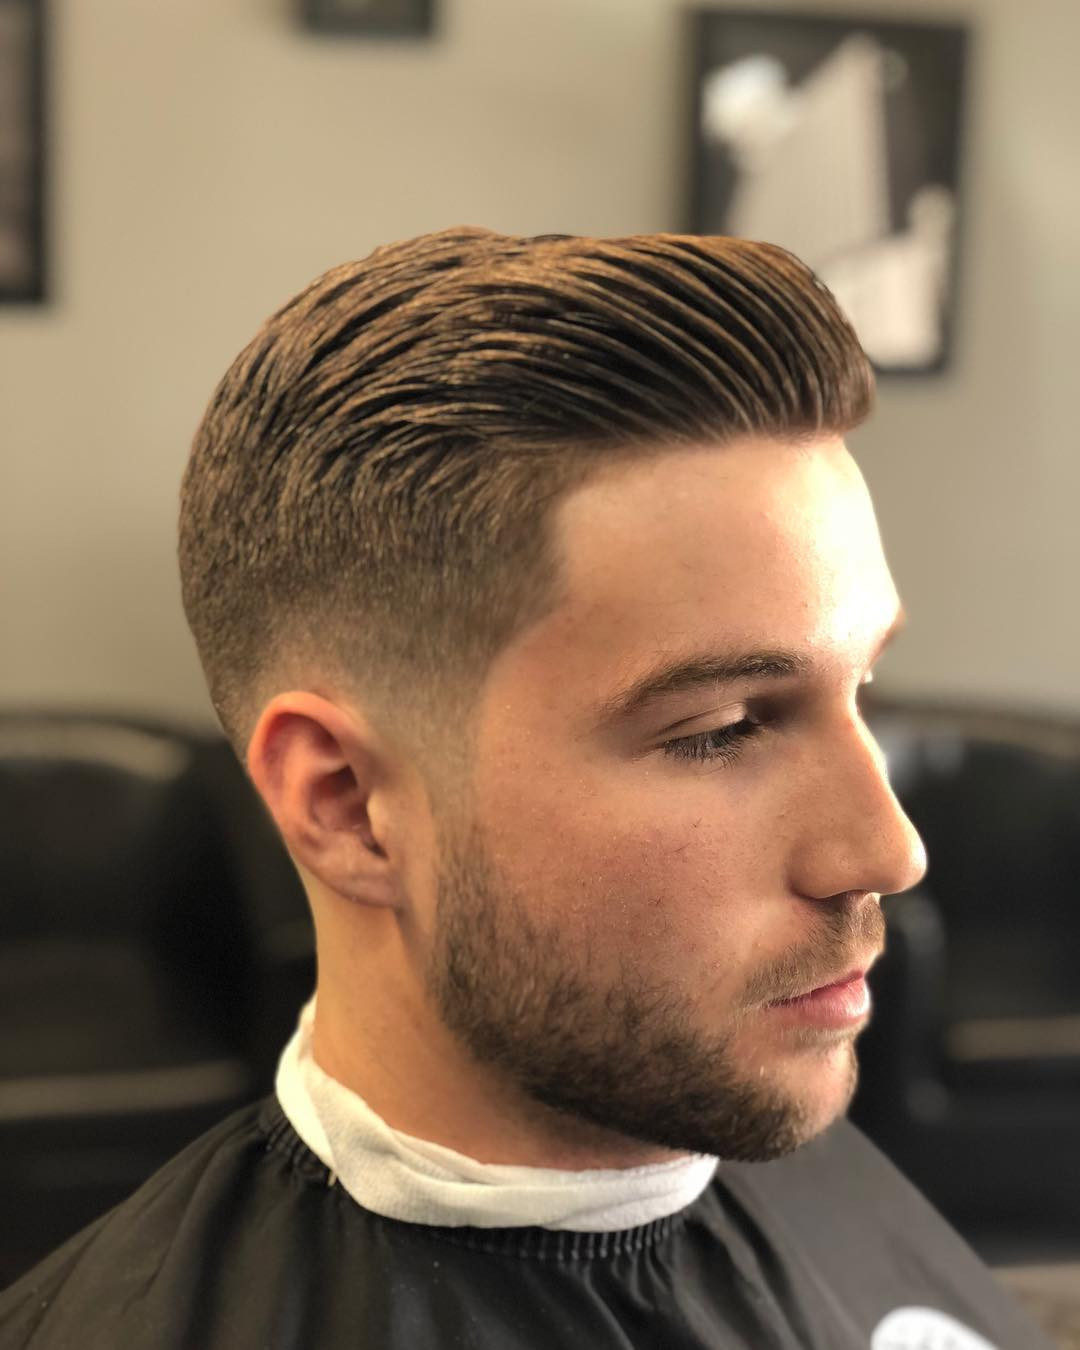 Undercut Fade Mens Haircuts
 5 Things You Must Consider Before Going A For Low Fade